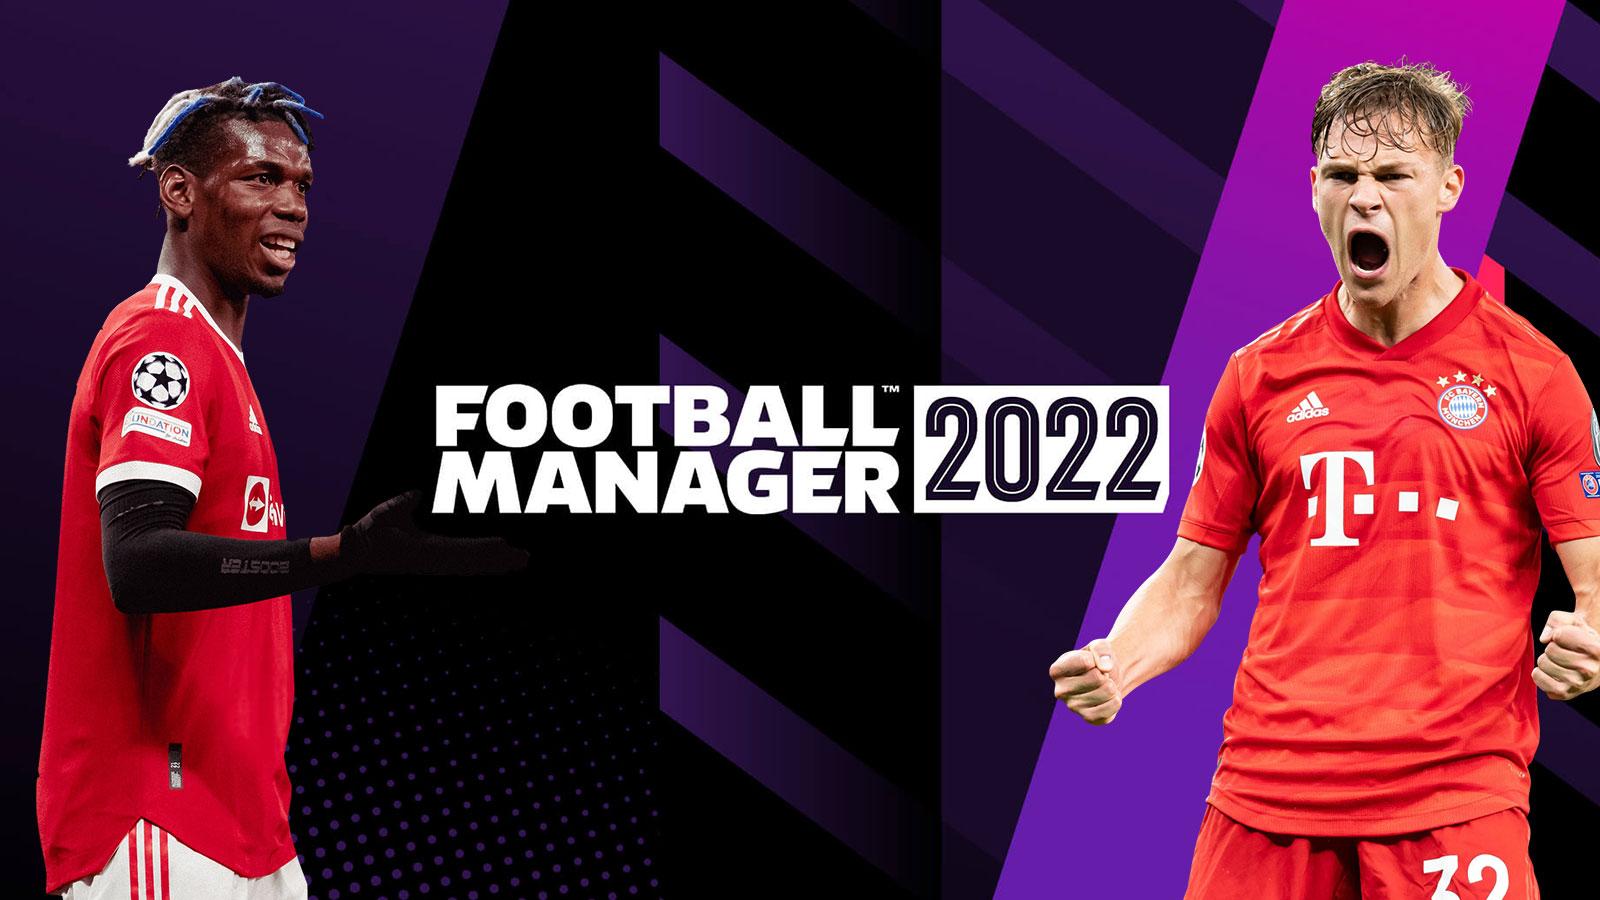 Pogba Kimmich Football Manager 2022